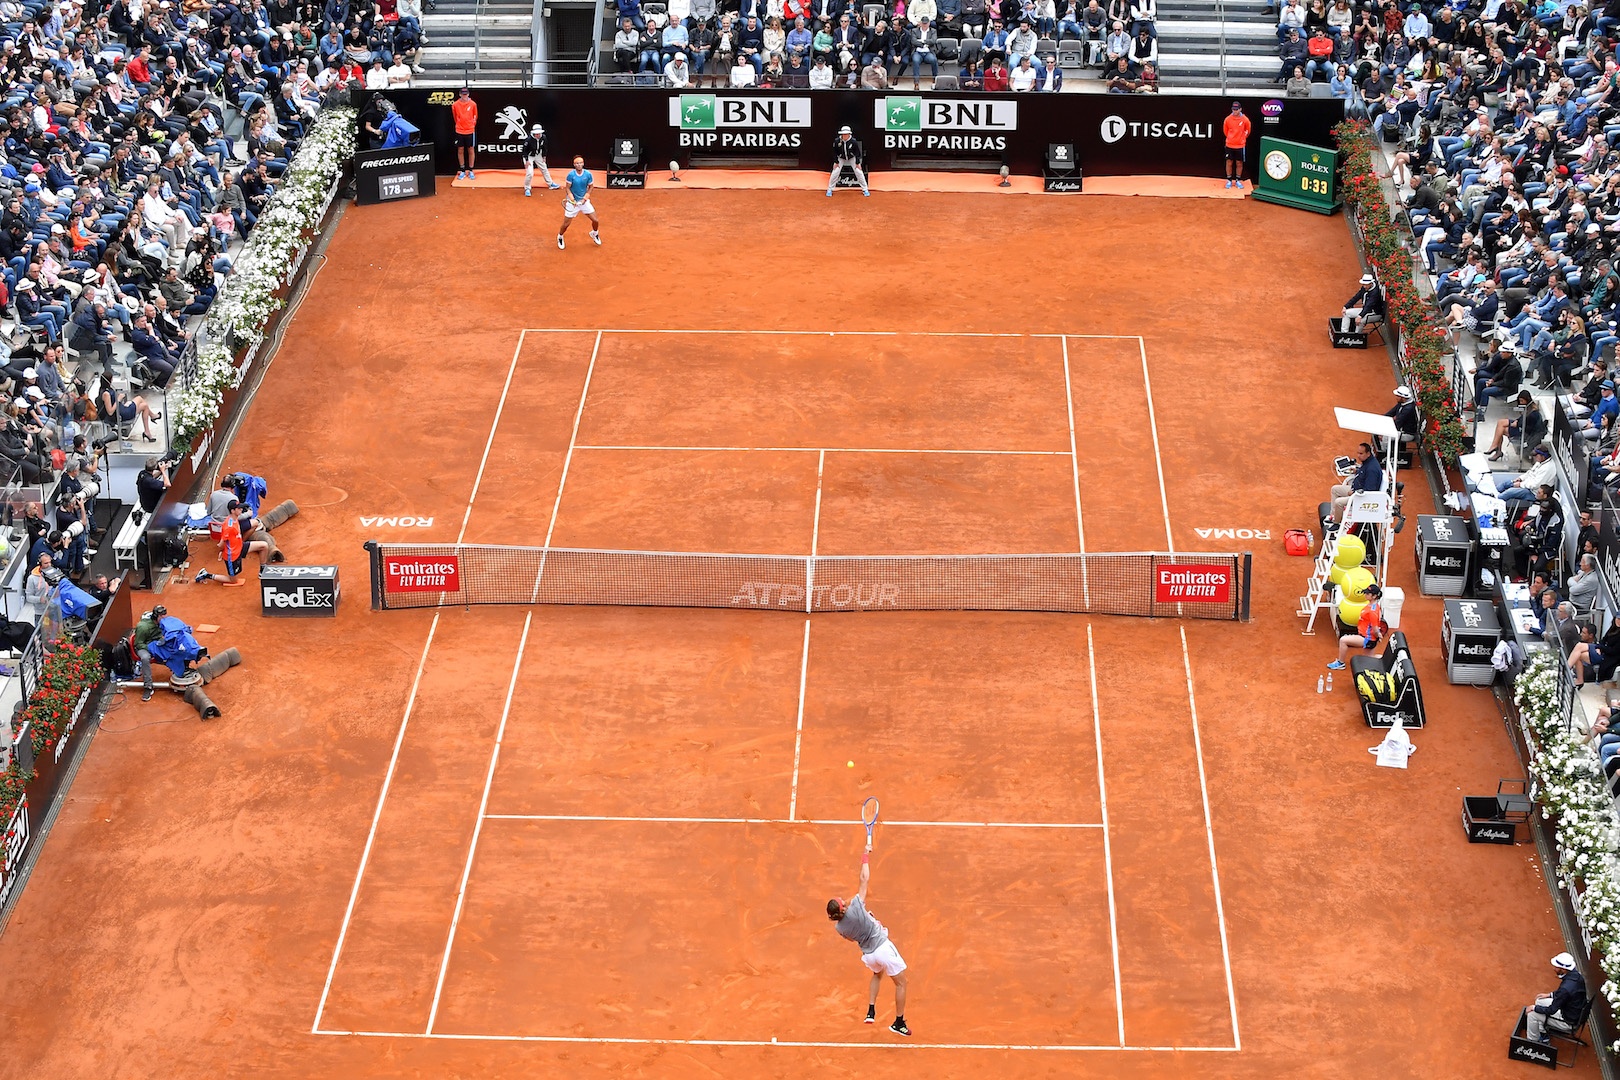 solsikke positur Slette Rome Masters 1000 / WTA Premier : 10 questions you may ask